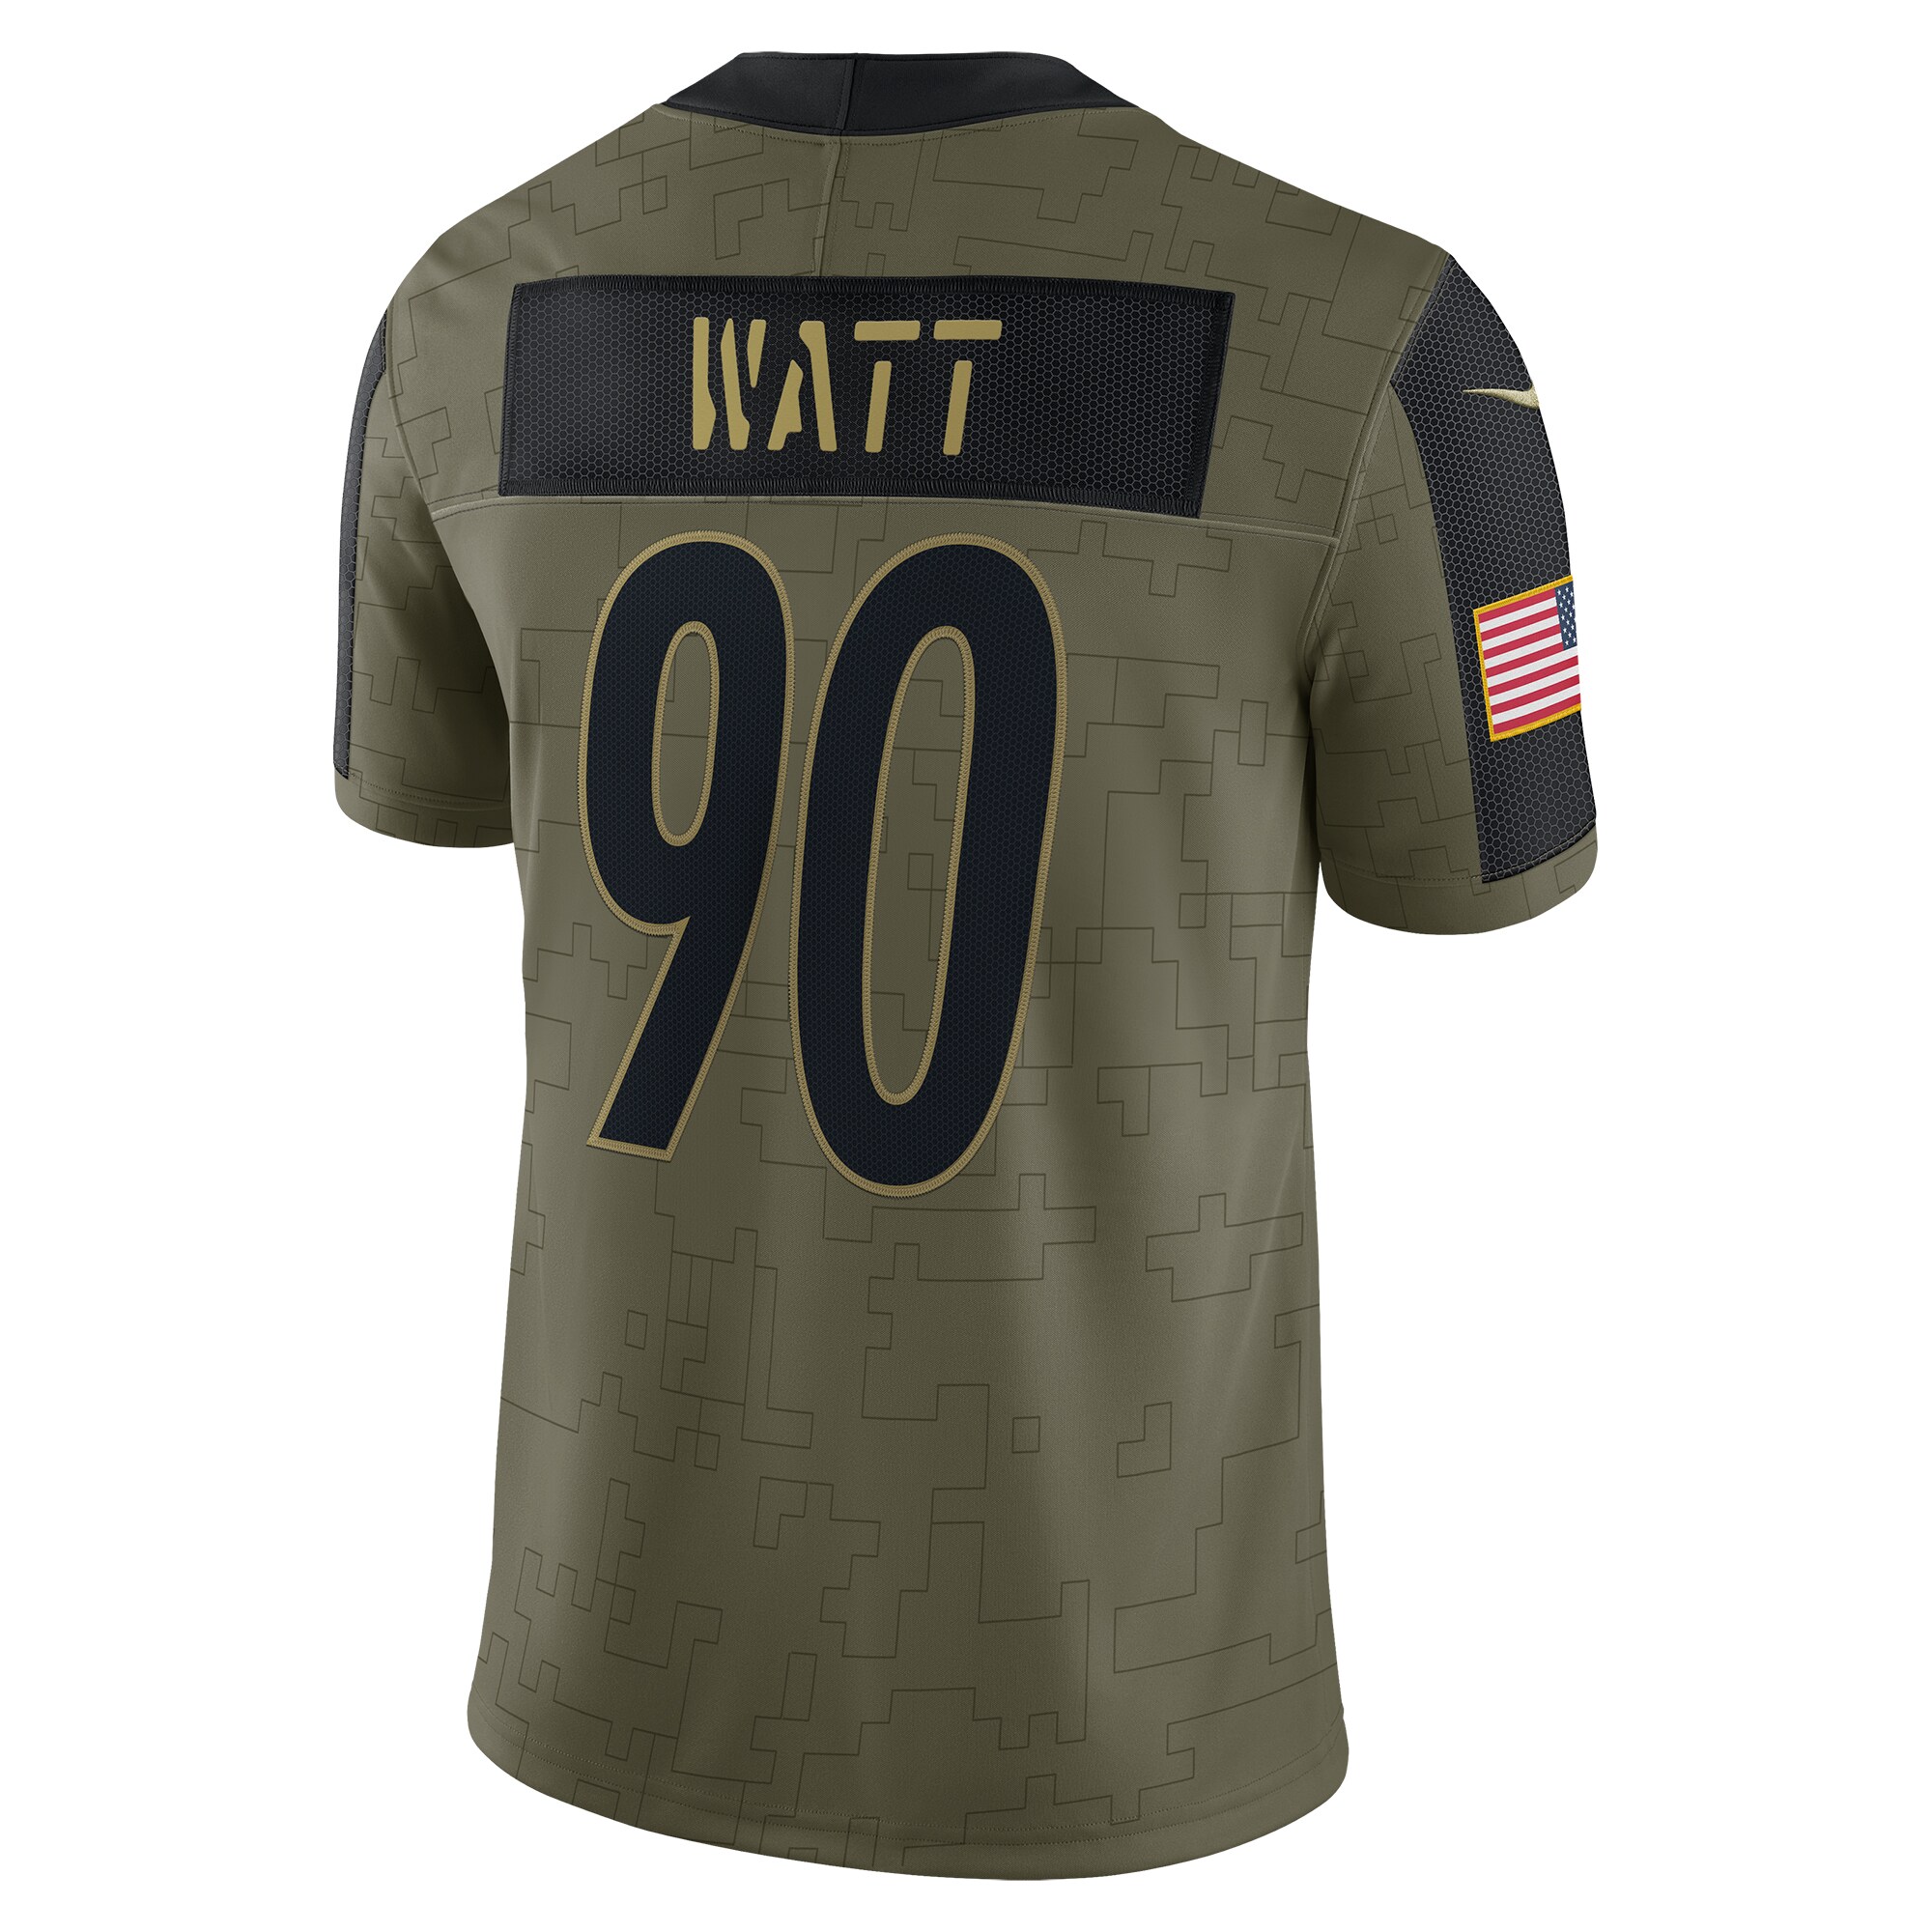 Men's Pittsburgh Steelers T.J. Watt Nike Olive 2021 Salute To Service Limited Player Jersey